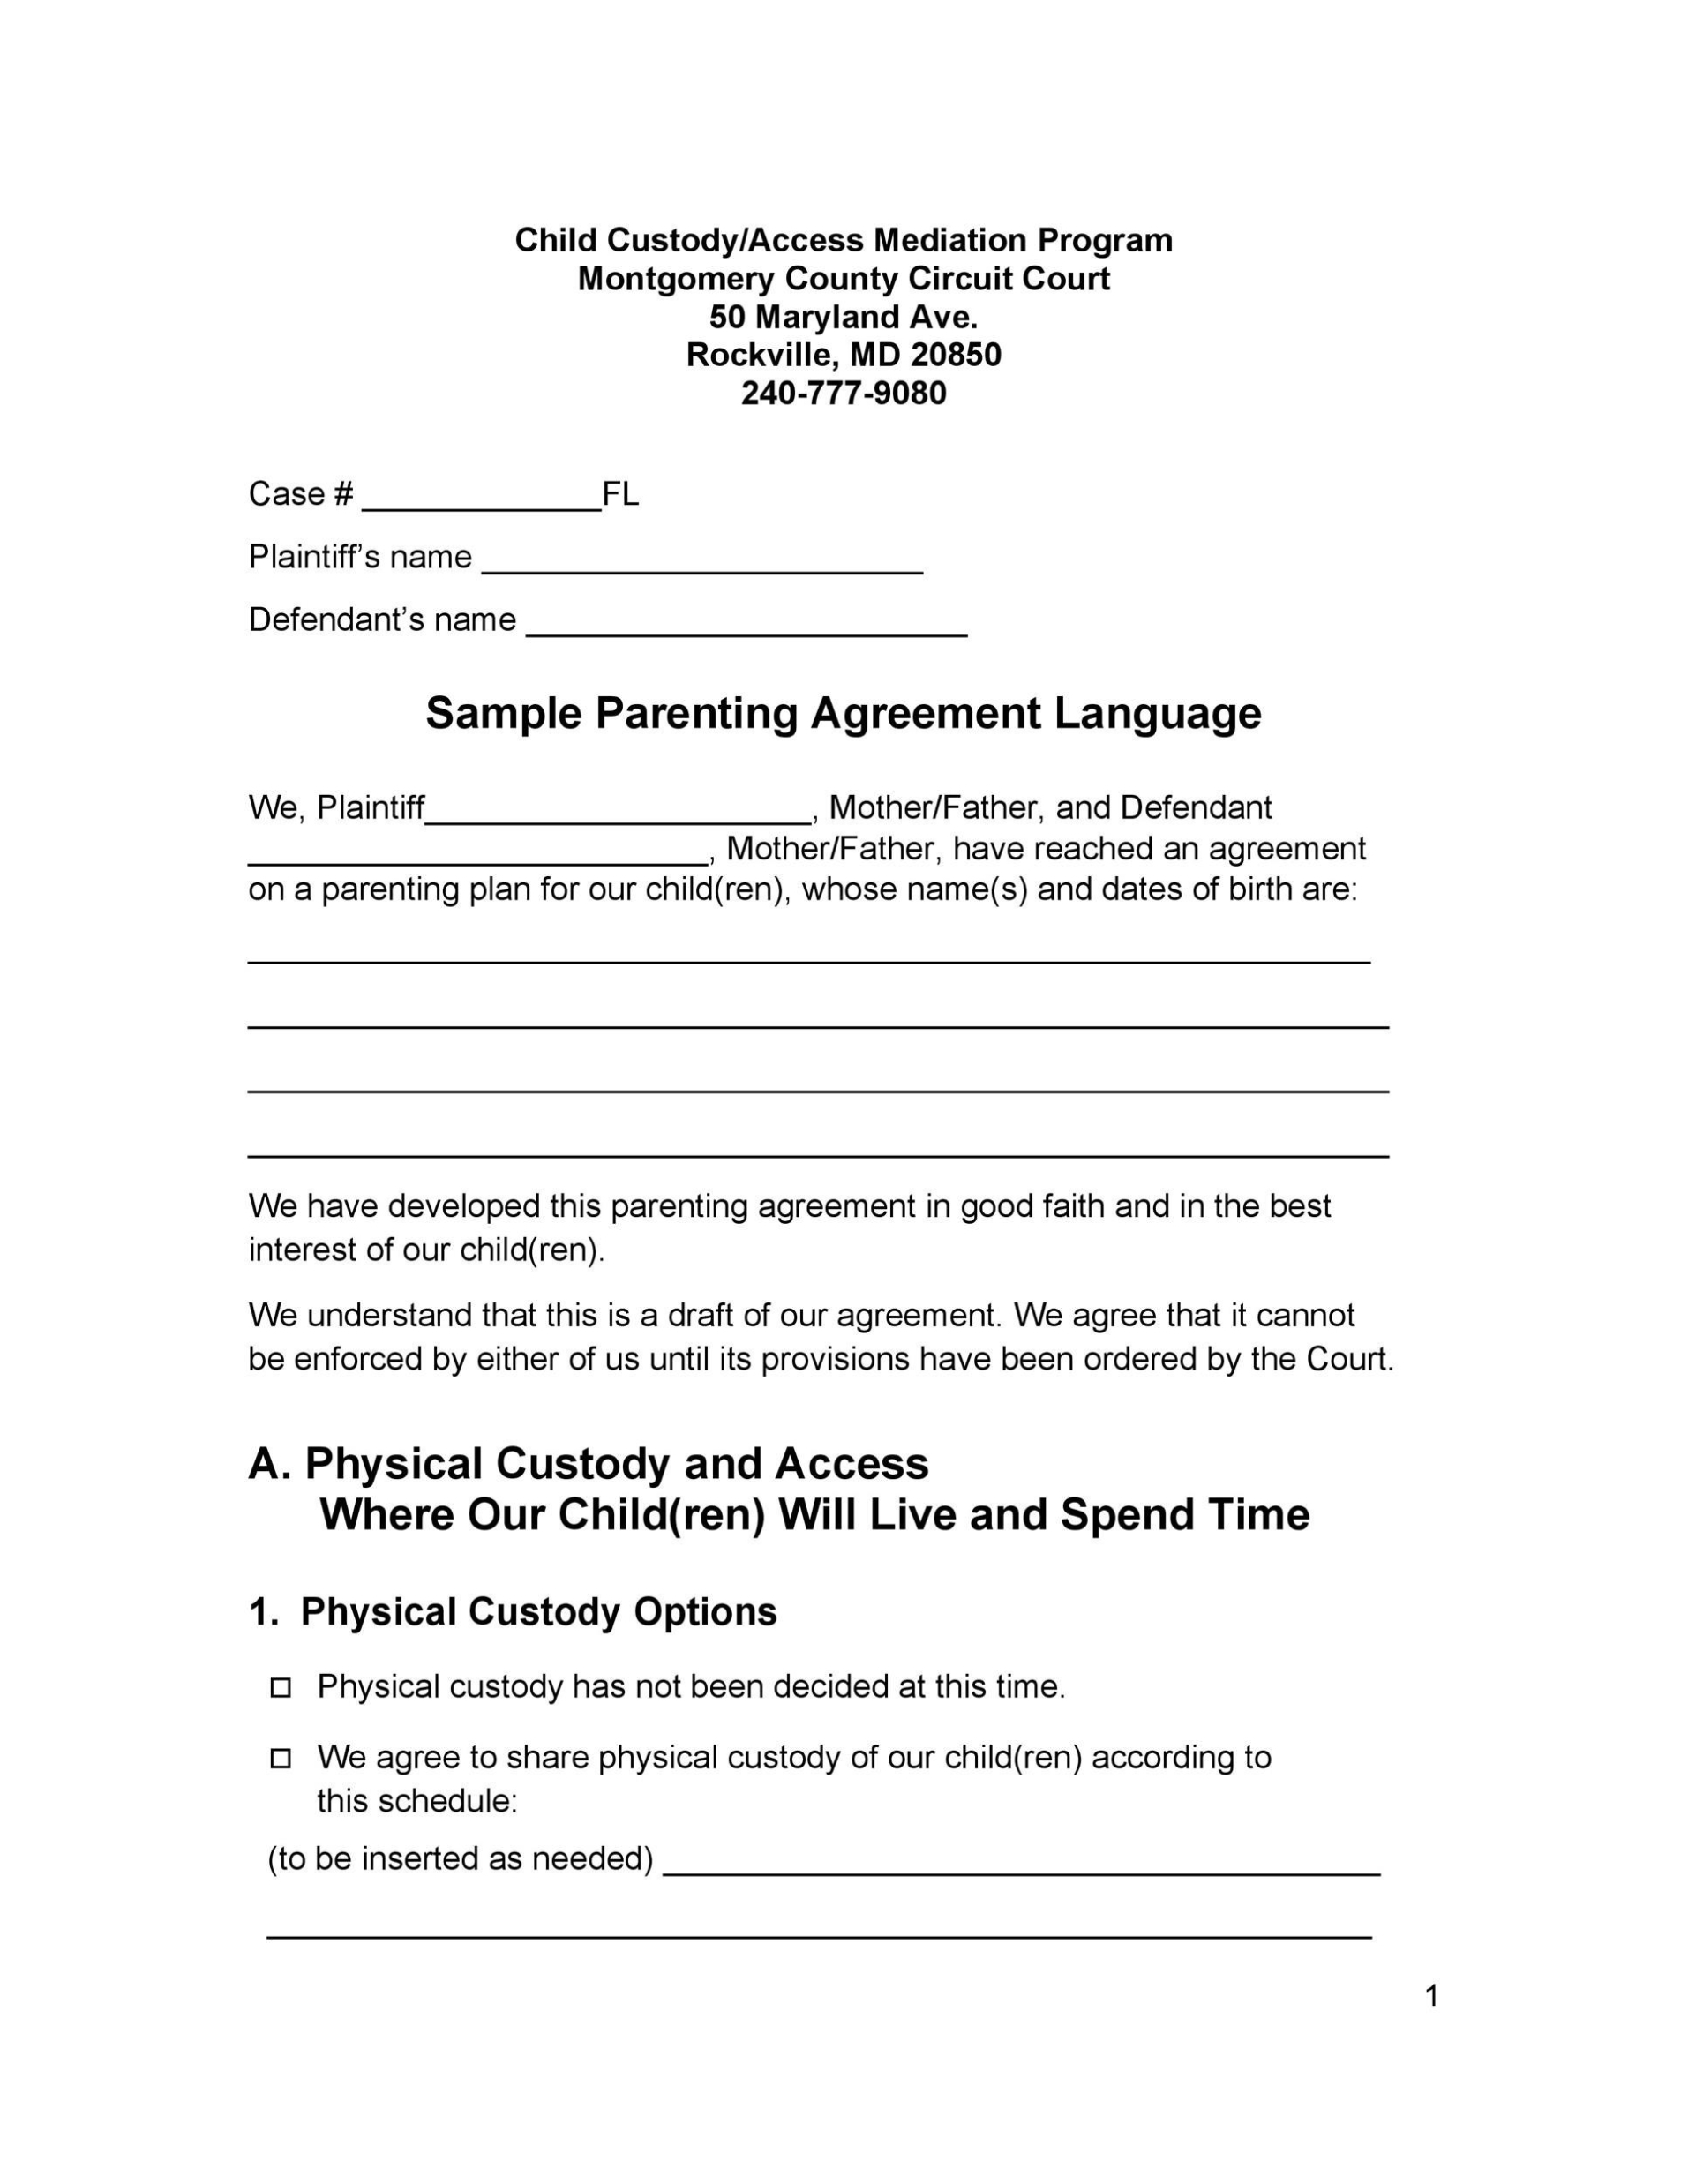 49 Free Parenting Plan &amp; Custody Agreement Templates ᐅ Templatelab with Child Relocation Agreement Template